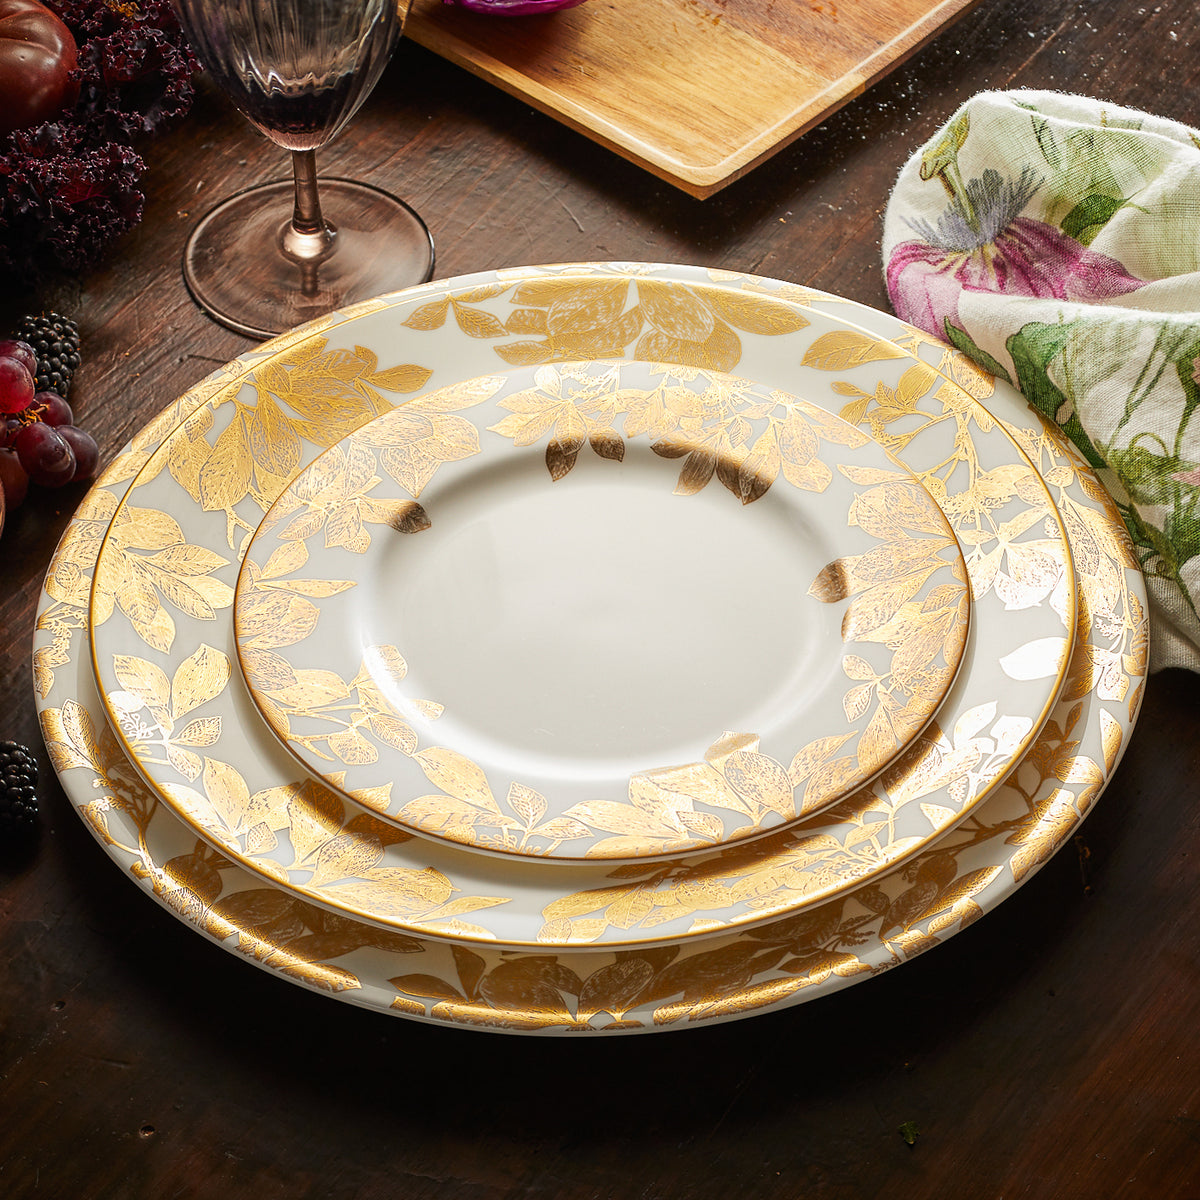 A set of Arbor Gold Rimmed Dinner Plates by Caskata Artisanal Home on a wooden table.